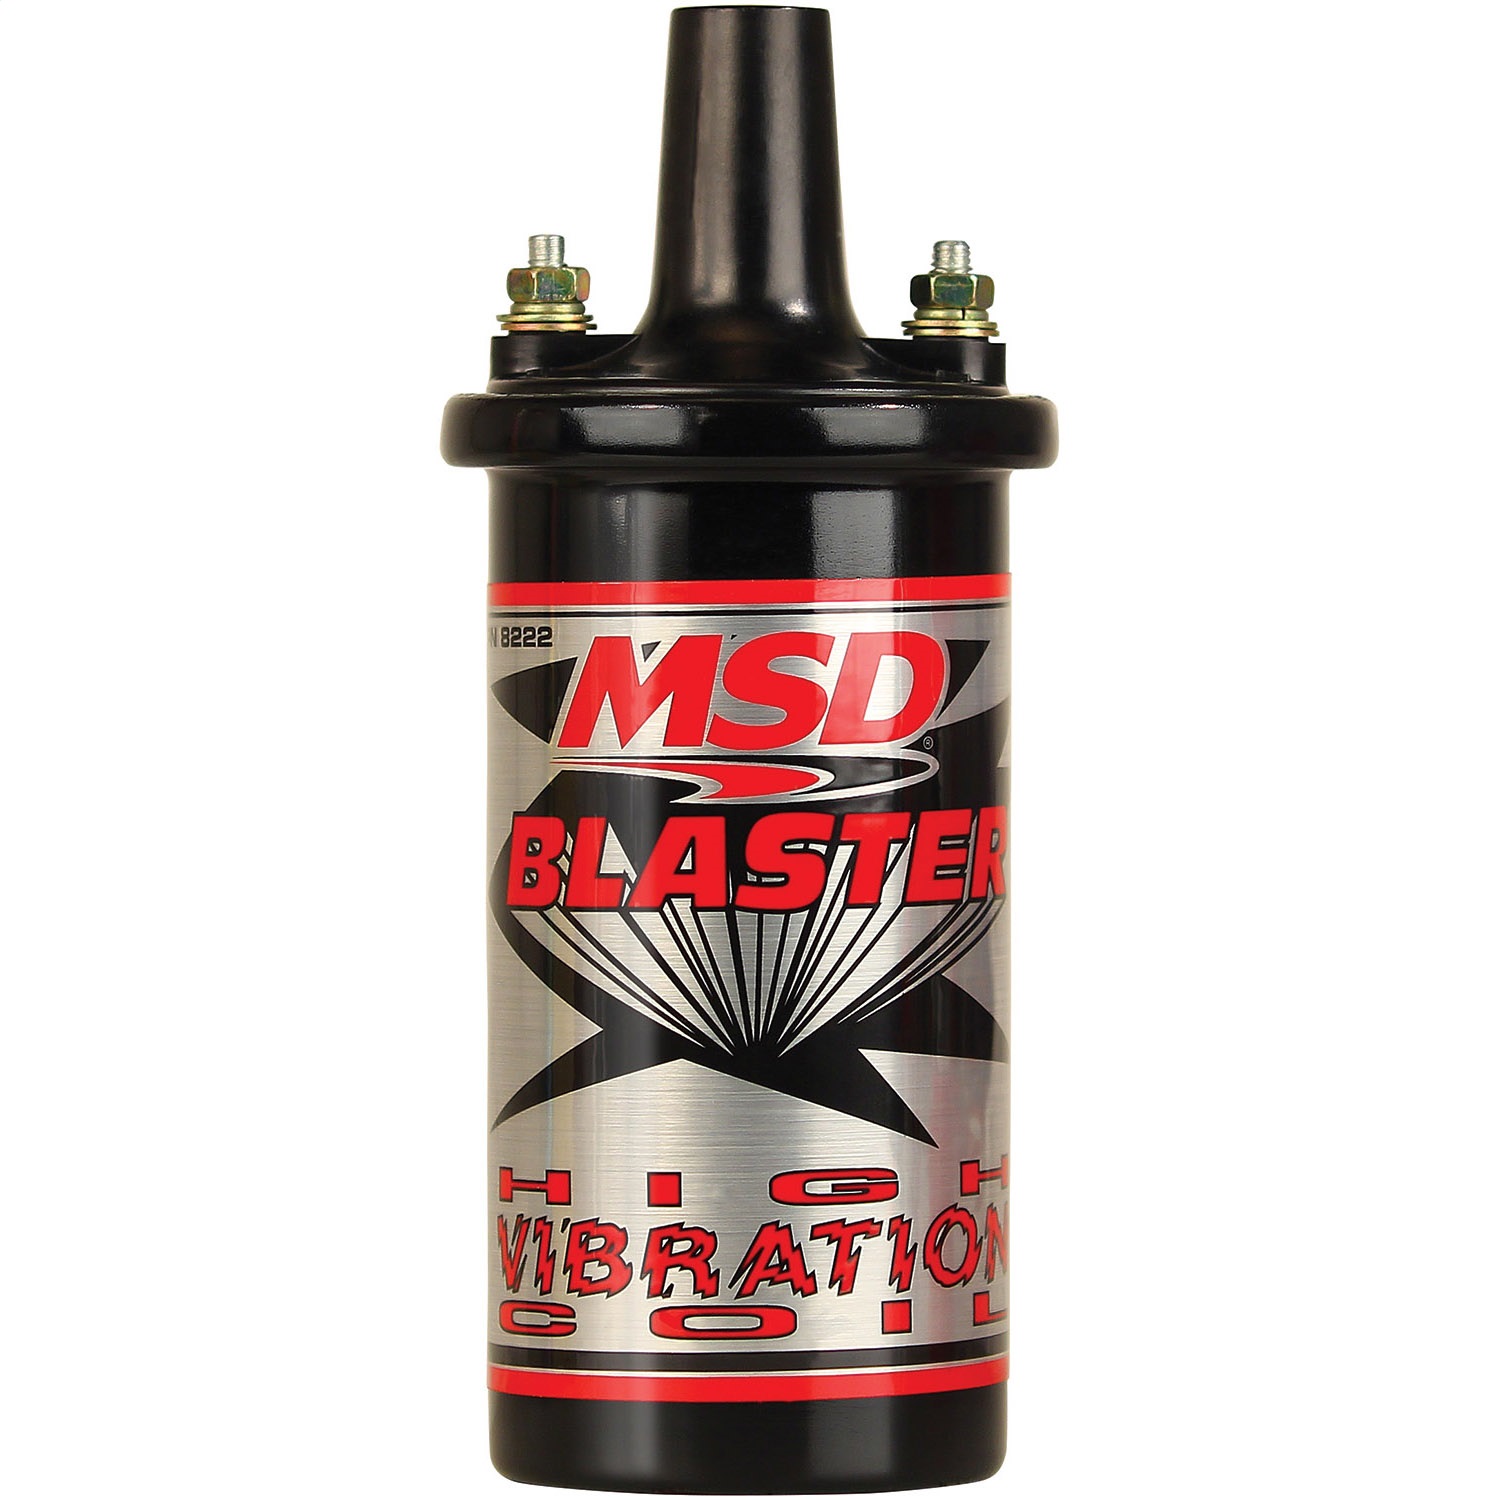 MSD Ignition MSD Ignition 8222 Blaster High Vibration; Ignition Coil